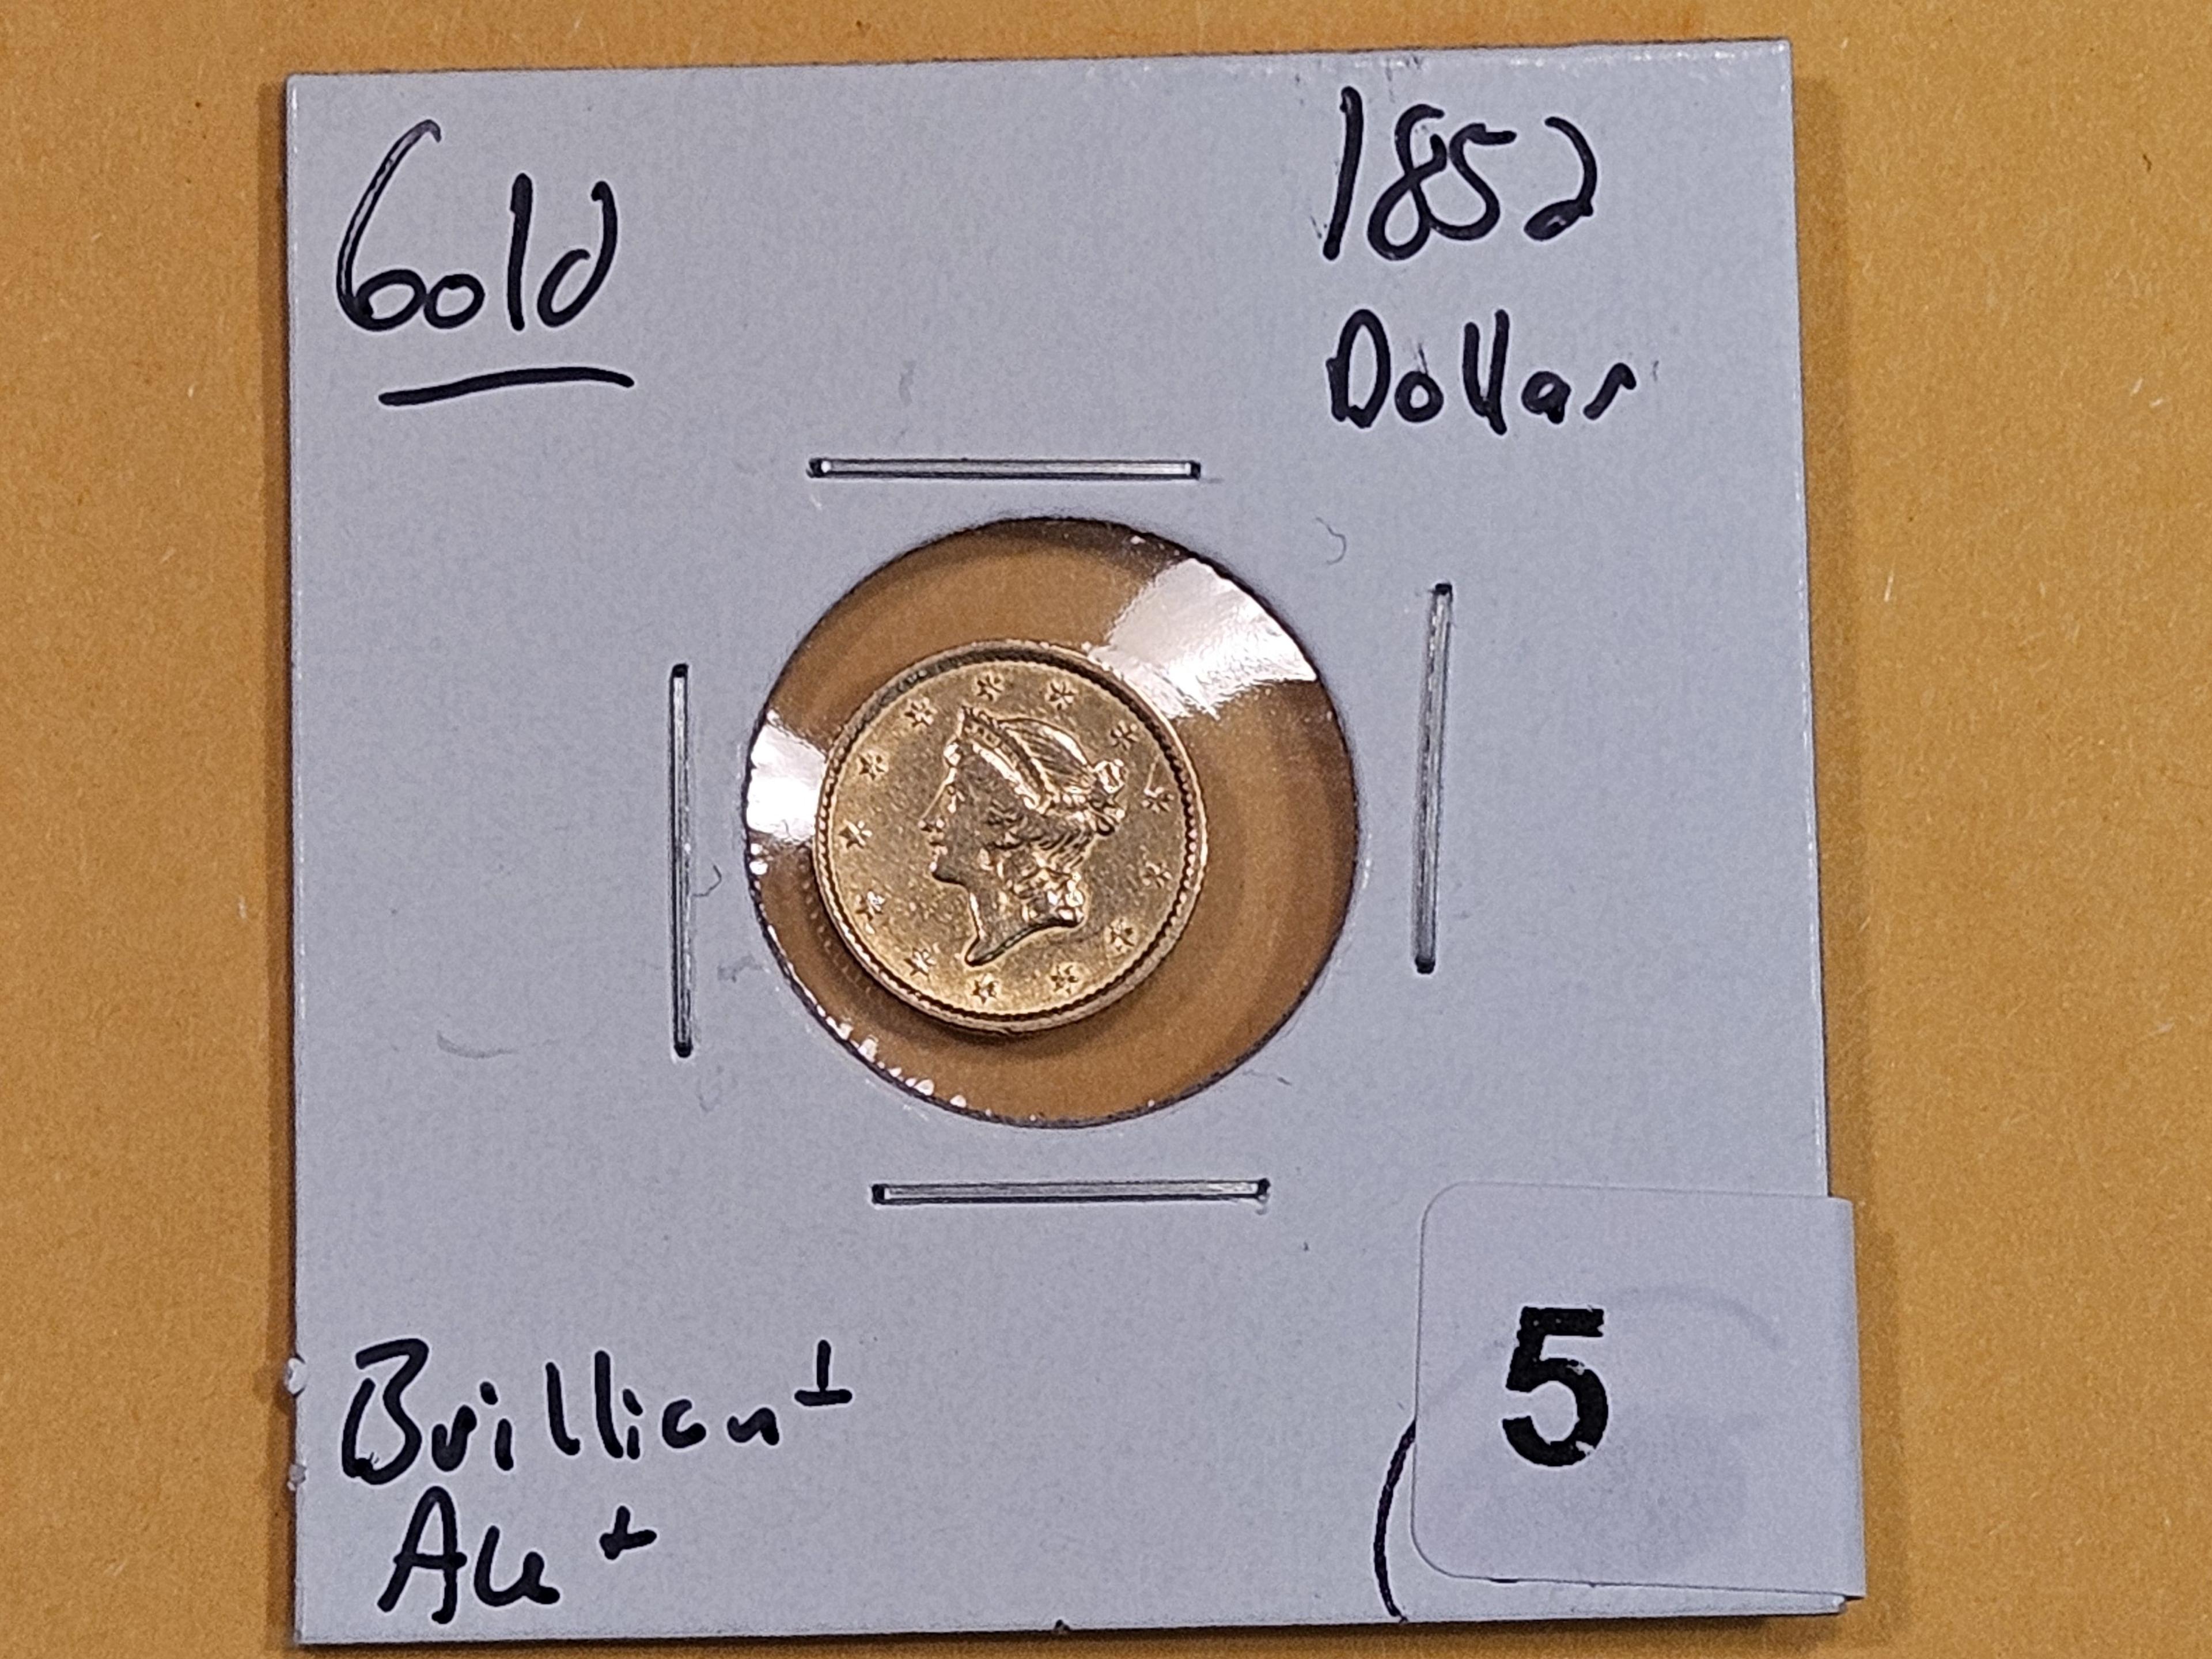 GOLD! 1852 Gold Dollar in Brilliant About Uncirculated plus